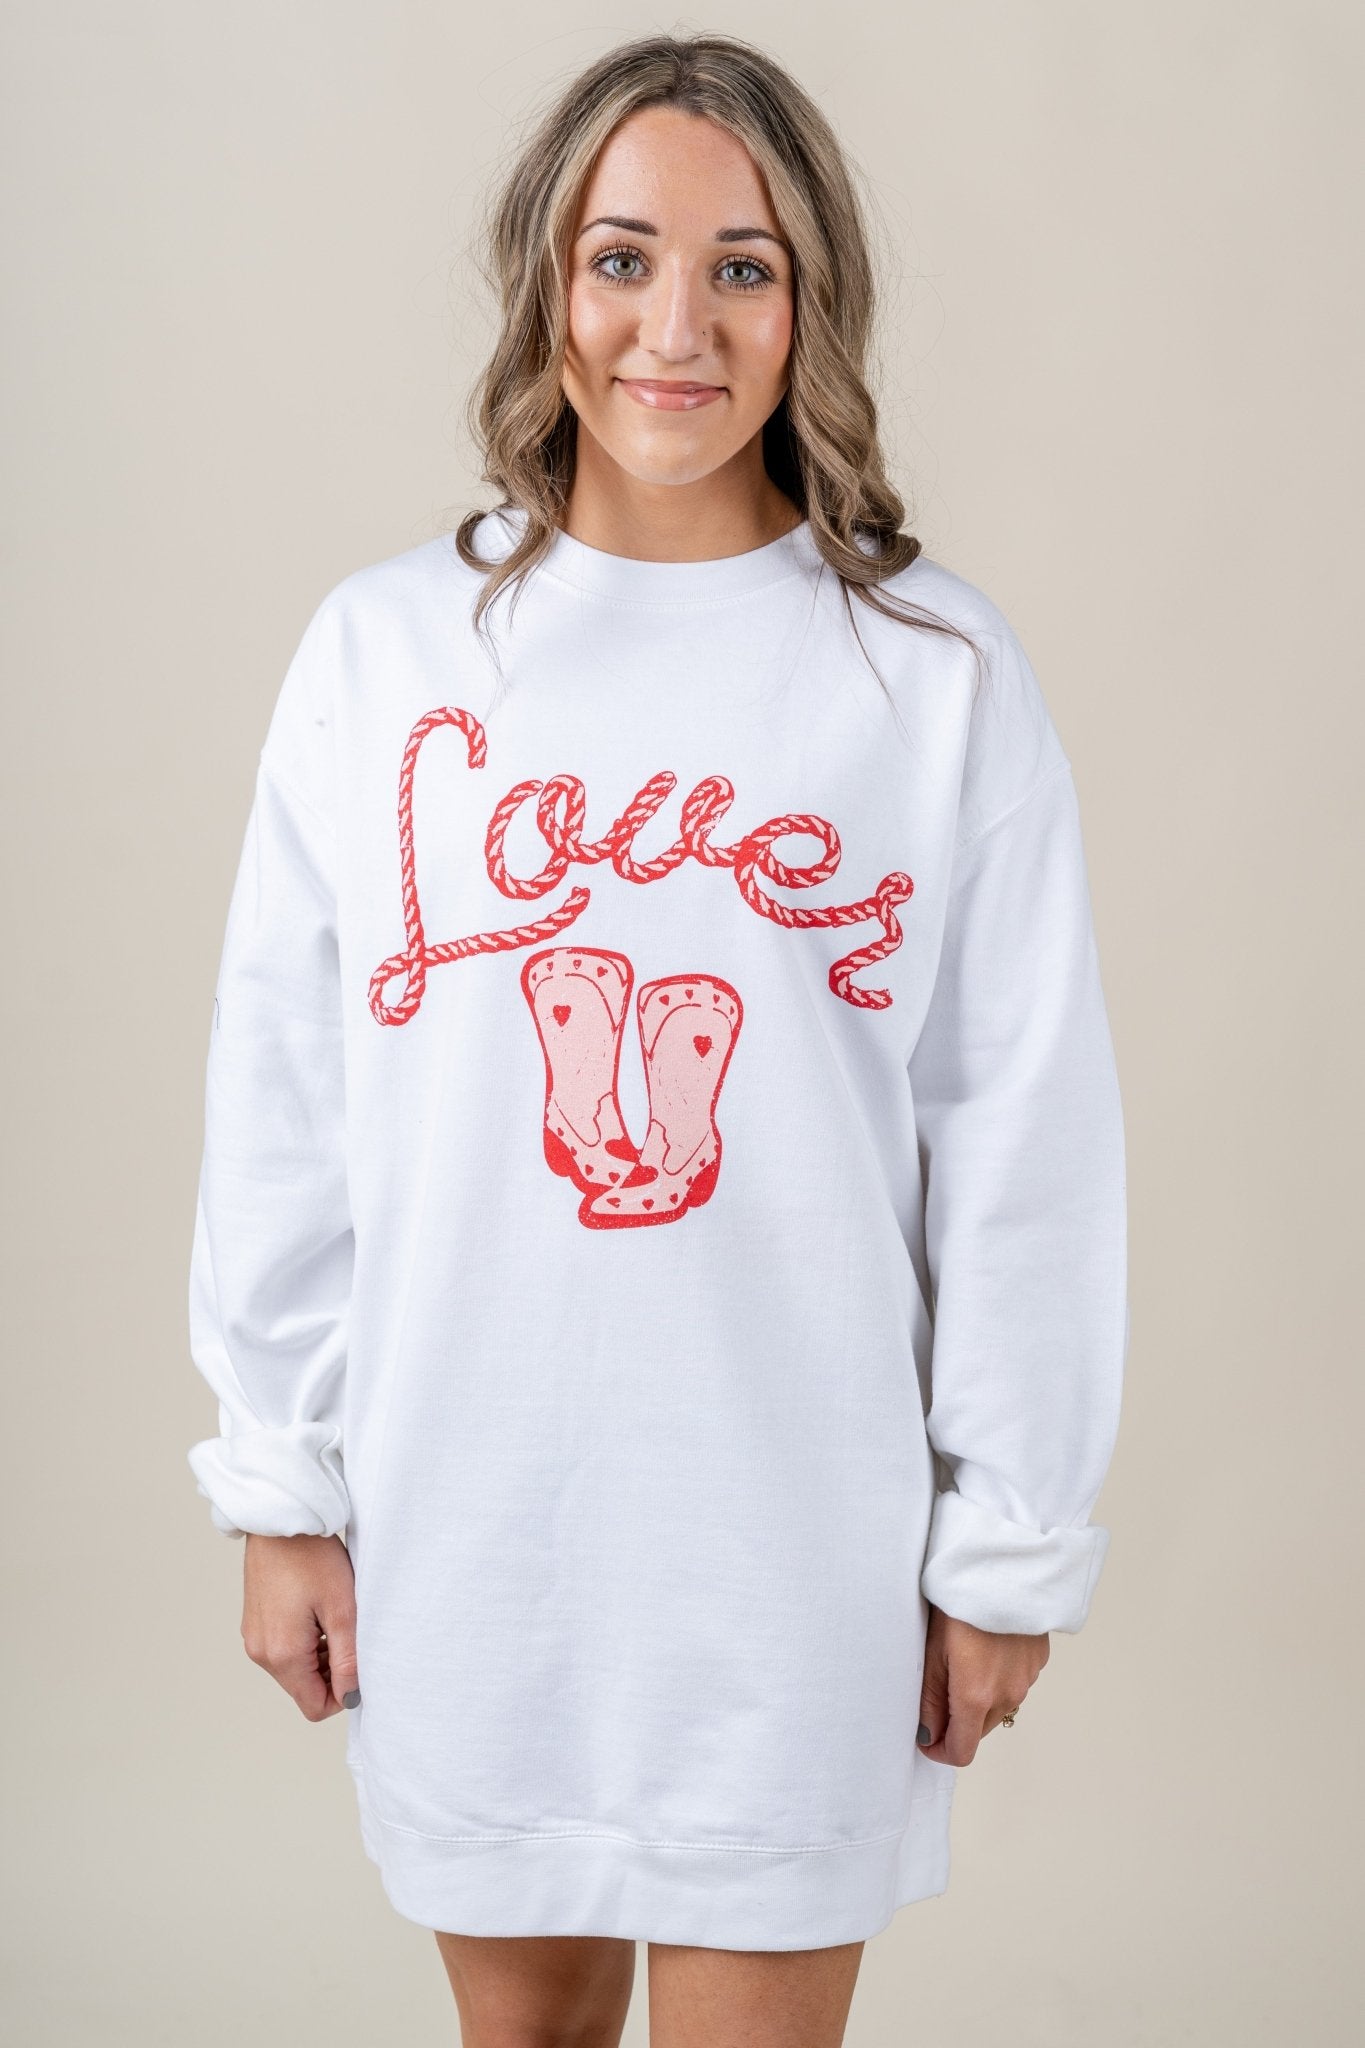 Lover boot sweatshirt dress white - Cute Valentine's Day Outfits at Lush Fashion Lounge Boutique in Oklahoma City